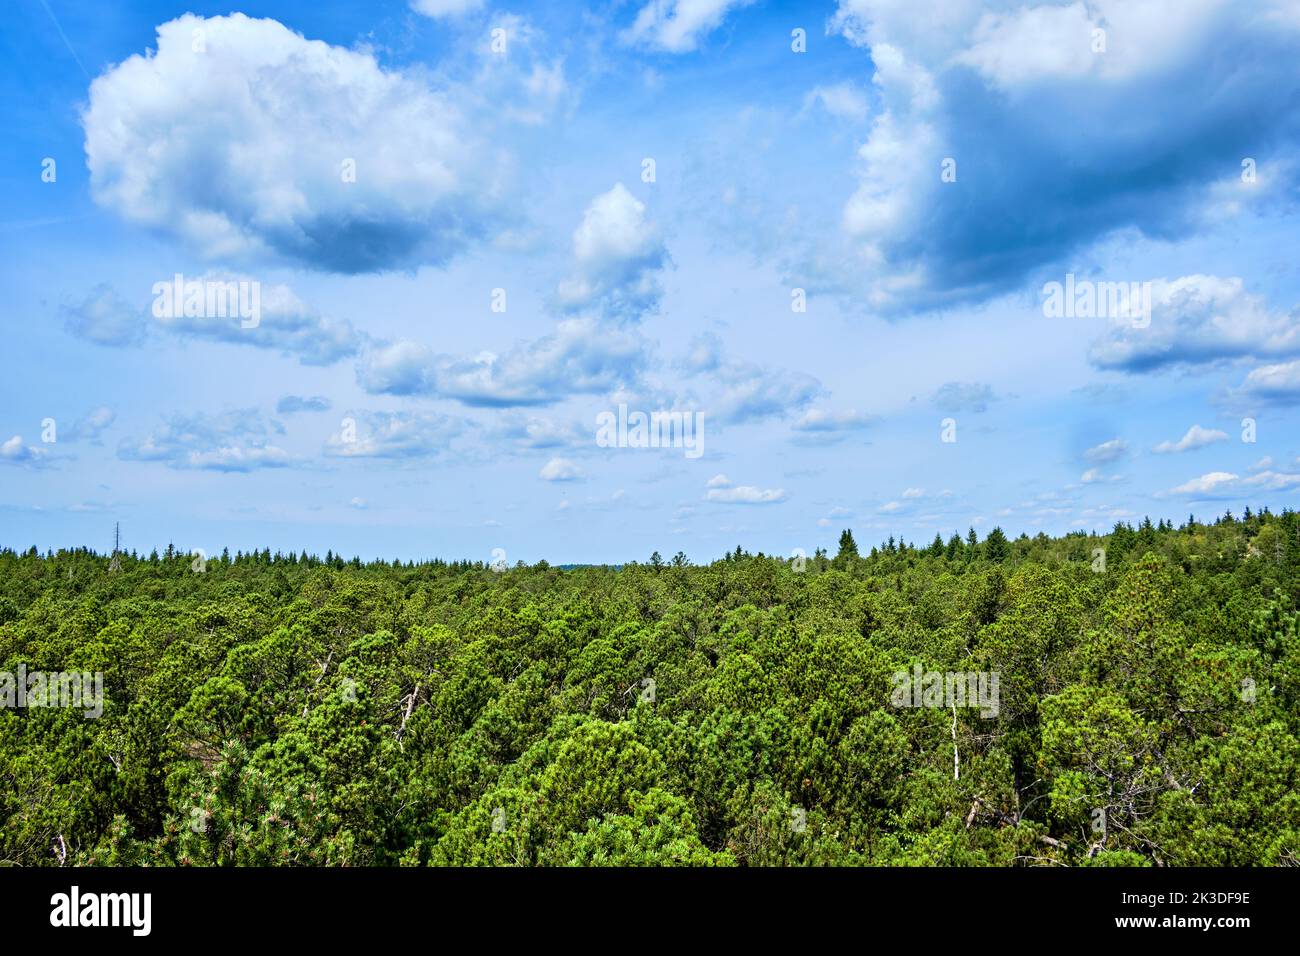 Vegetation and scenery in the nature reserve of the Georgenfeld Raised Bog (Georgenfelder Hochmoor ), Altenberg, Saxony, Germany. Stock Photo